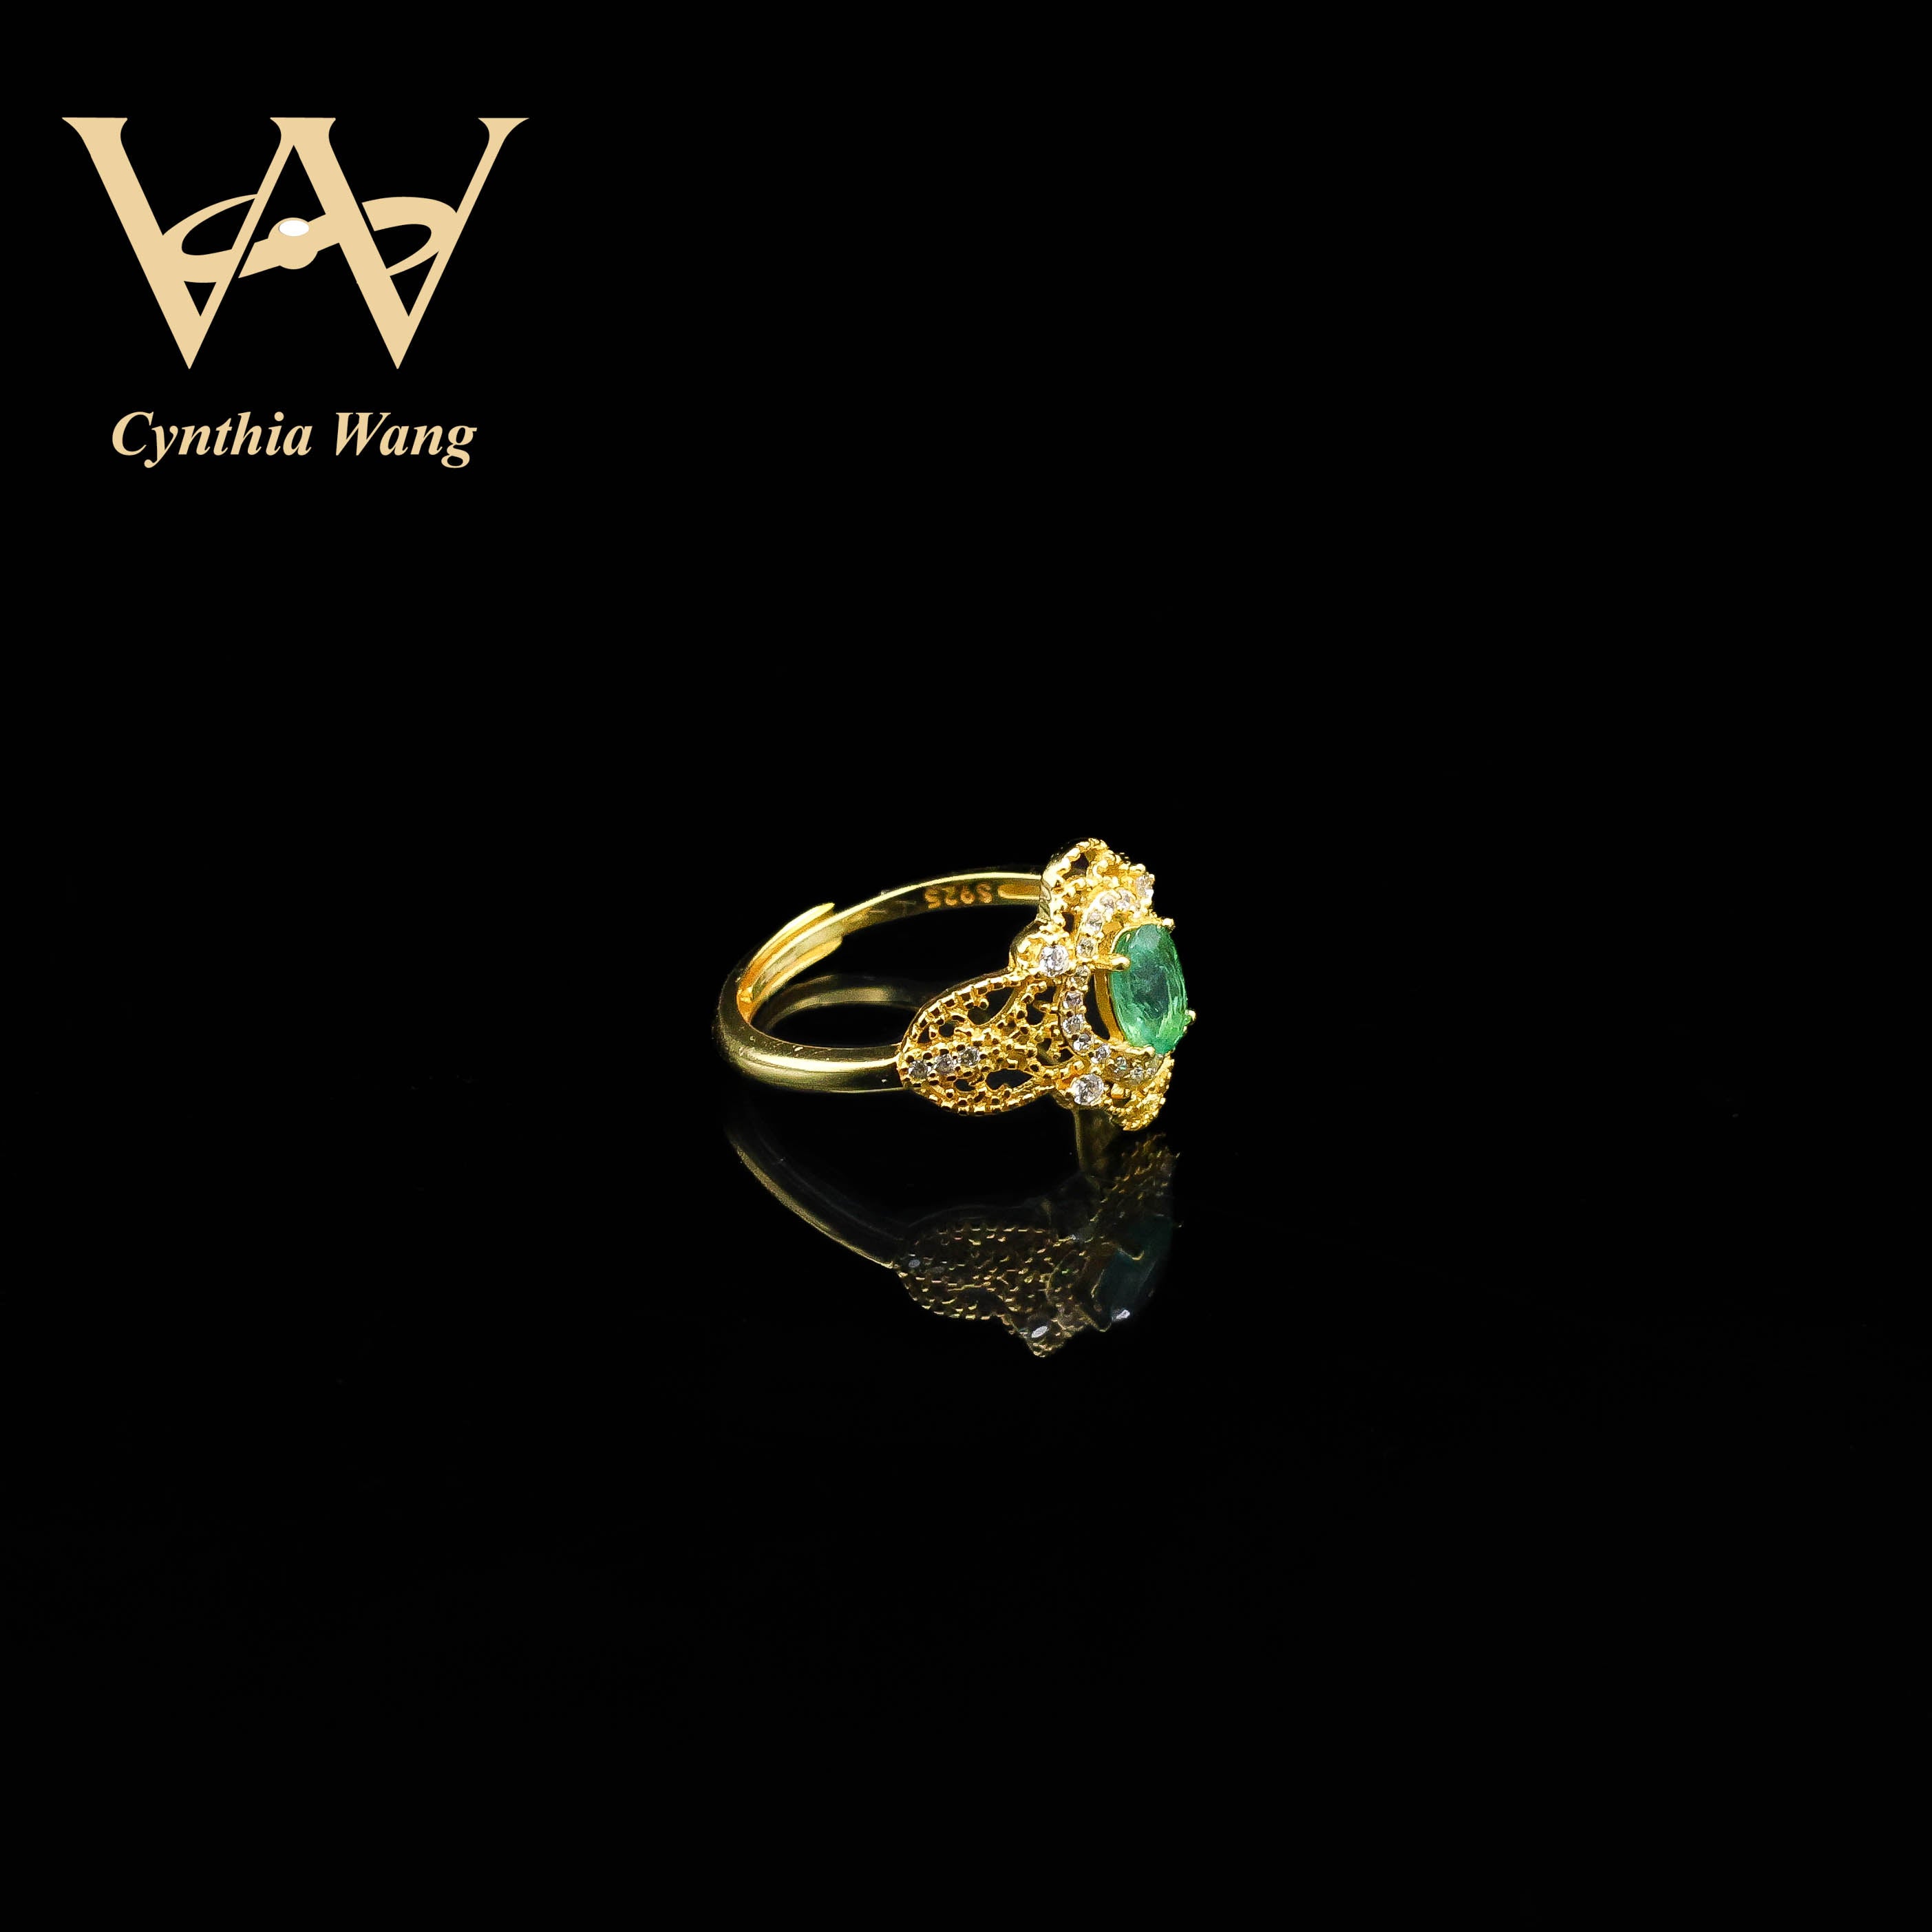 'Golden Aura of Nature' Emerald Ring with Lace Detailing